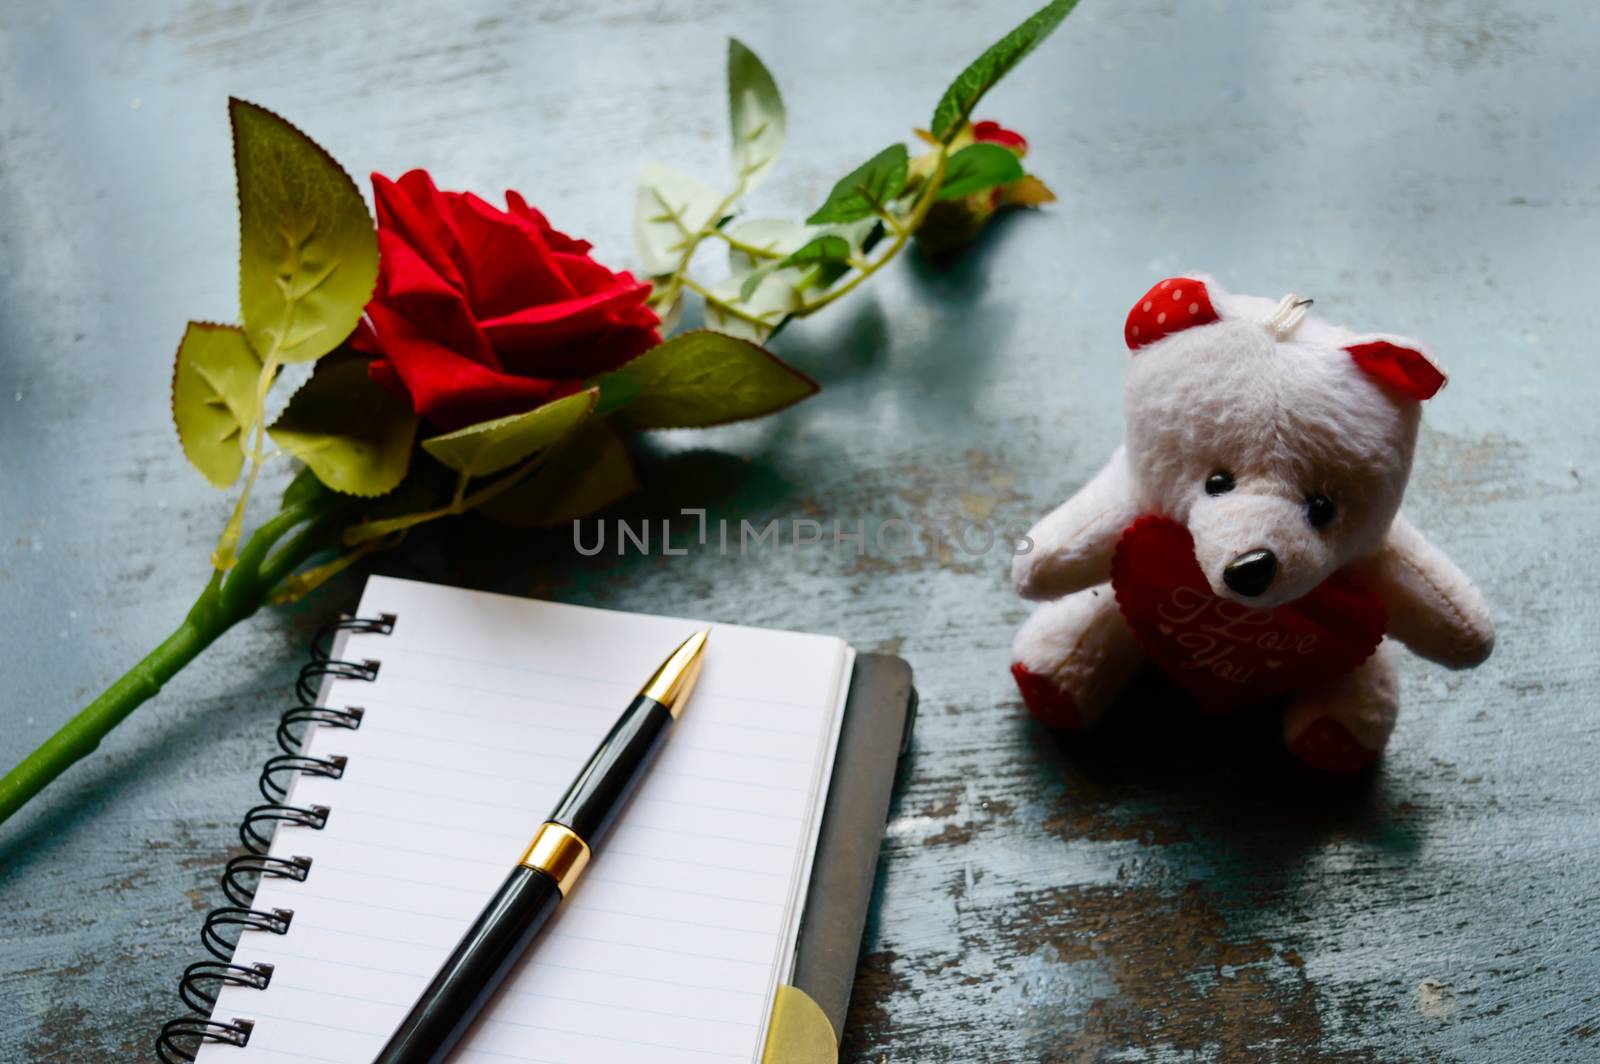 Blank Page Notebook, pen, a beautiful red rose on rustic metal floor background placed near a teddy. Love letter Writing Proposal or propose and waiting concept for valentines day holidays Top view.